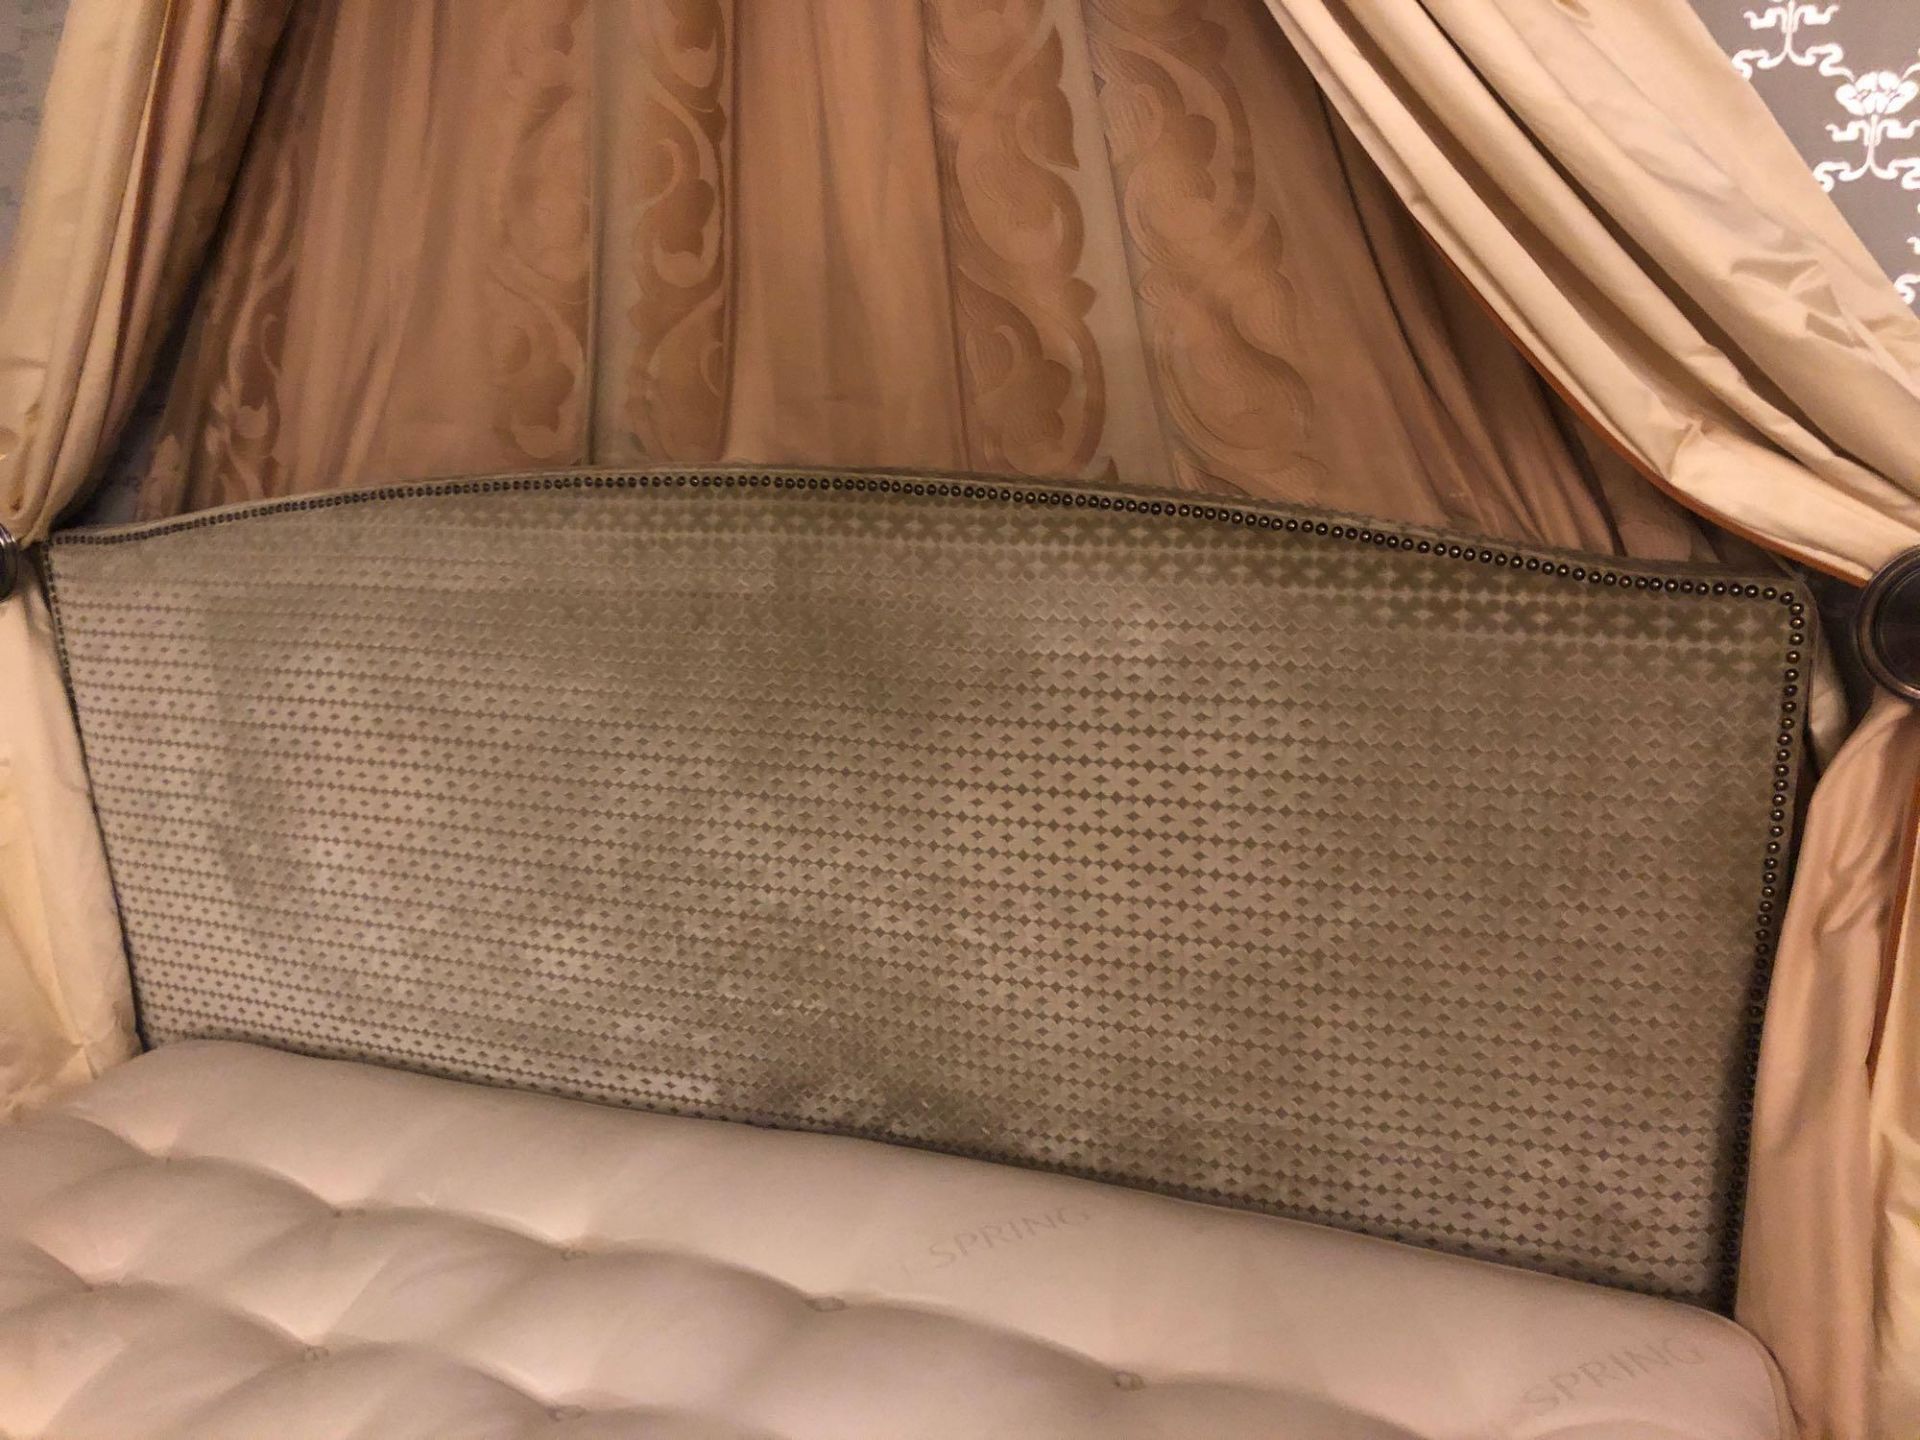 Headboard, Handcrafted With Nail Trim And Padded Textured Woven Upholstery With Gold Pelmet